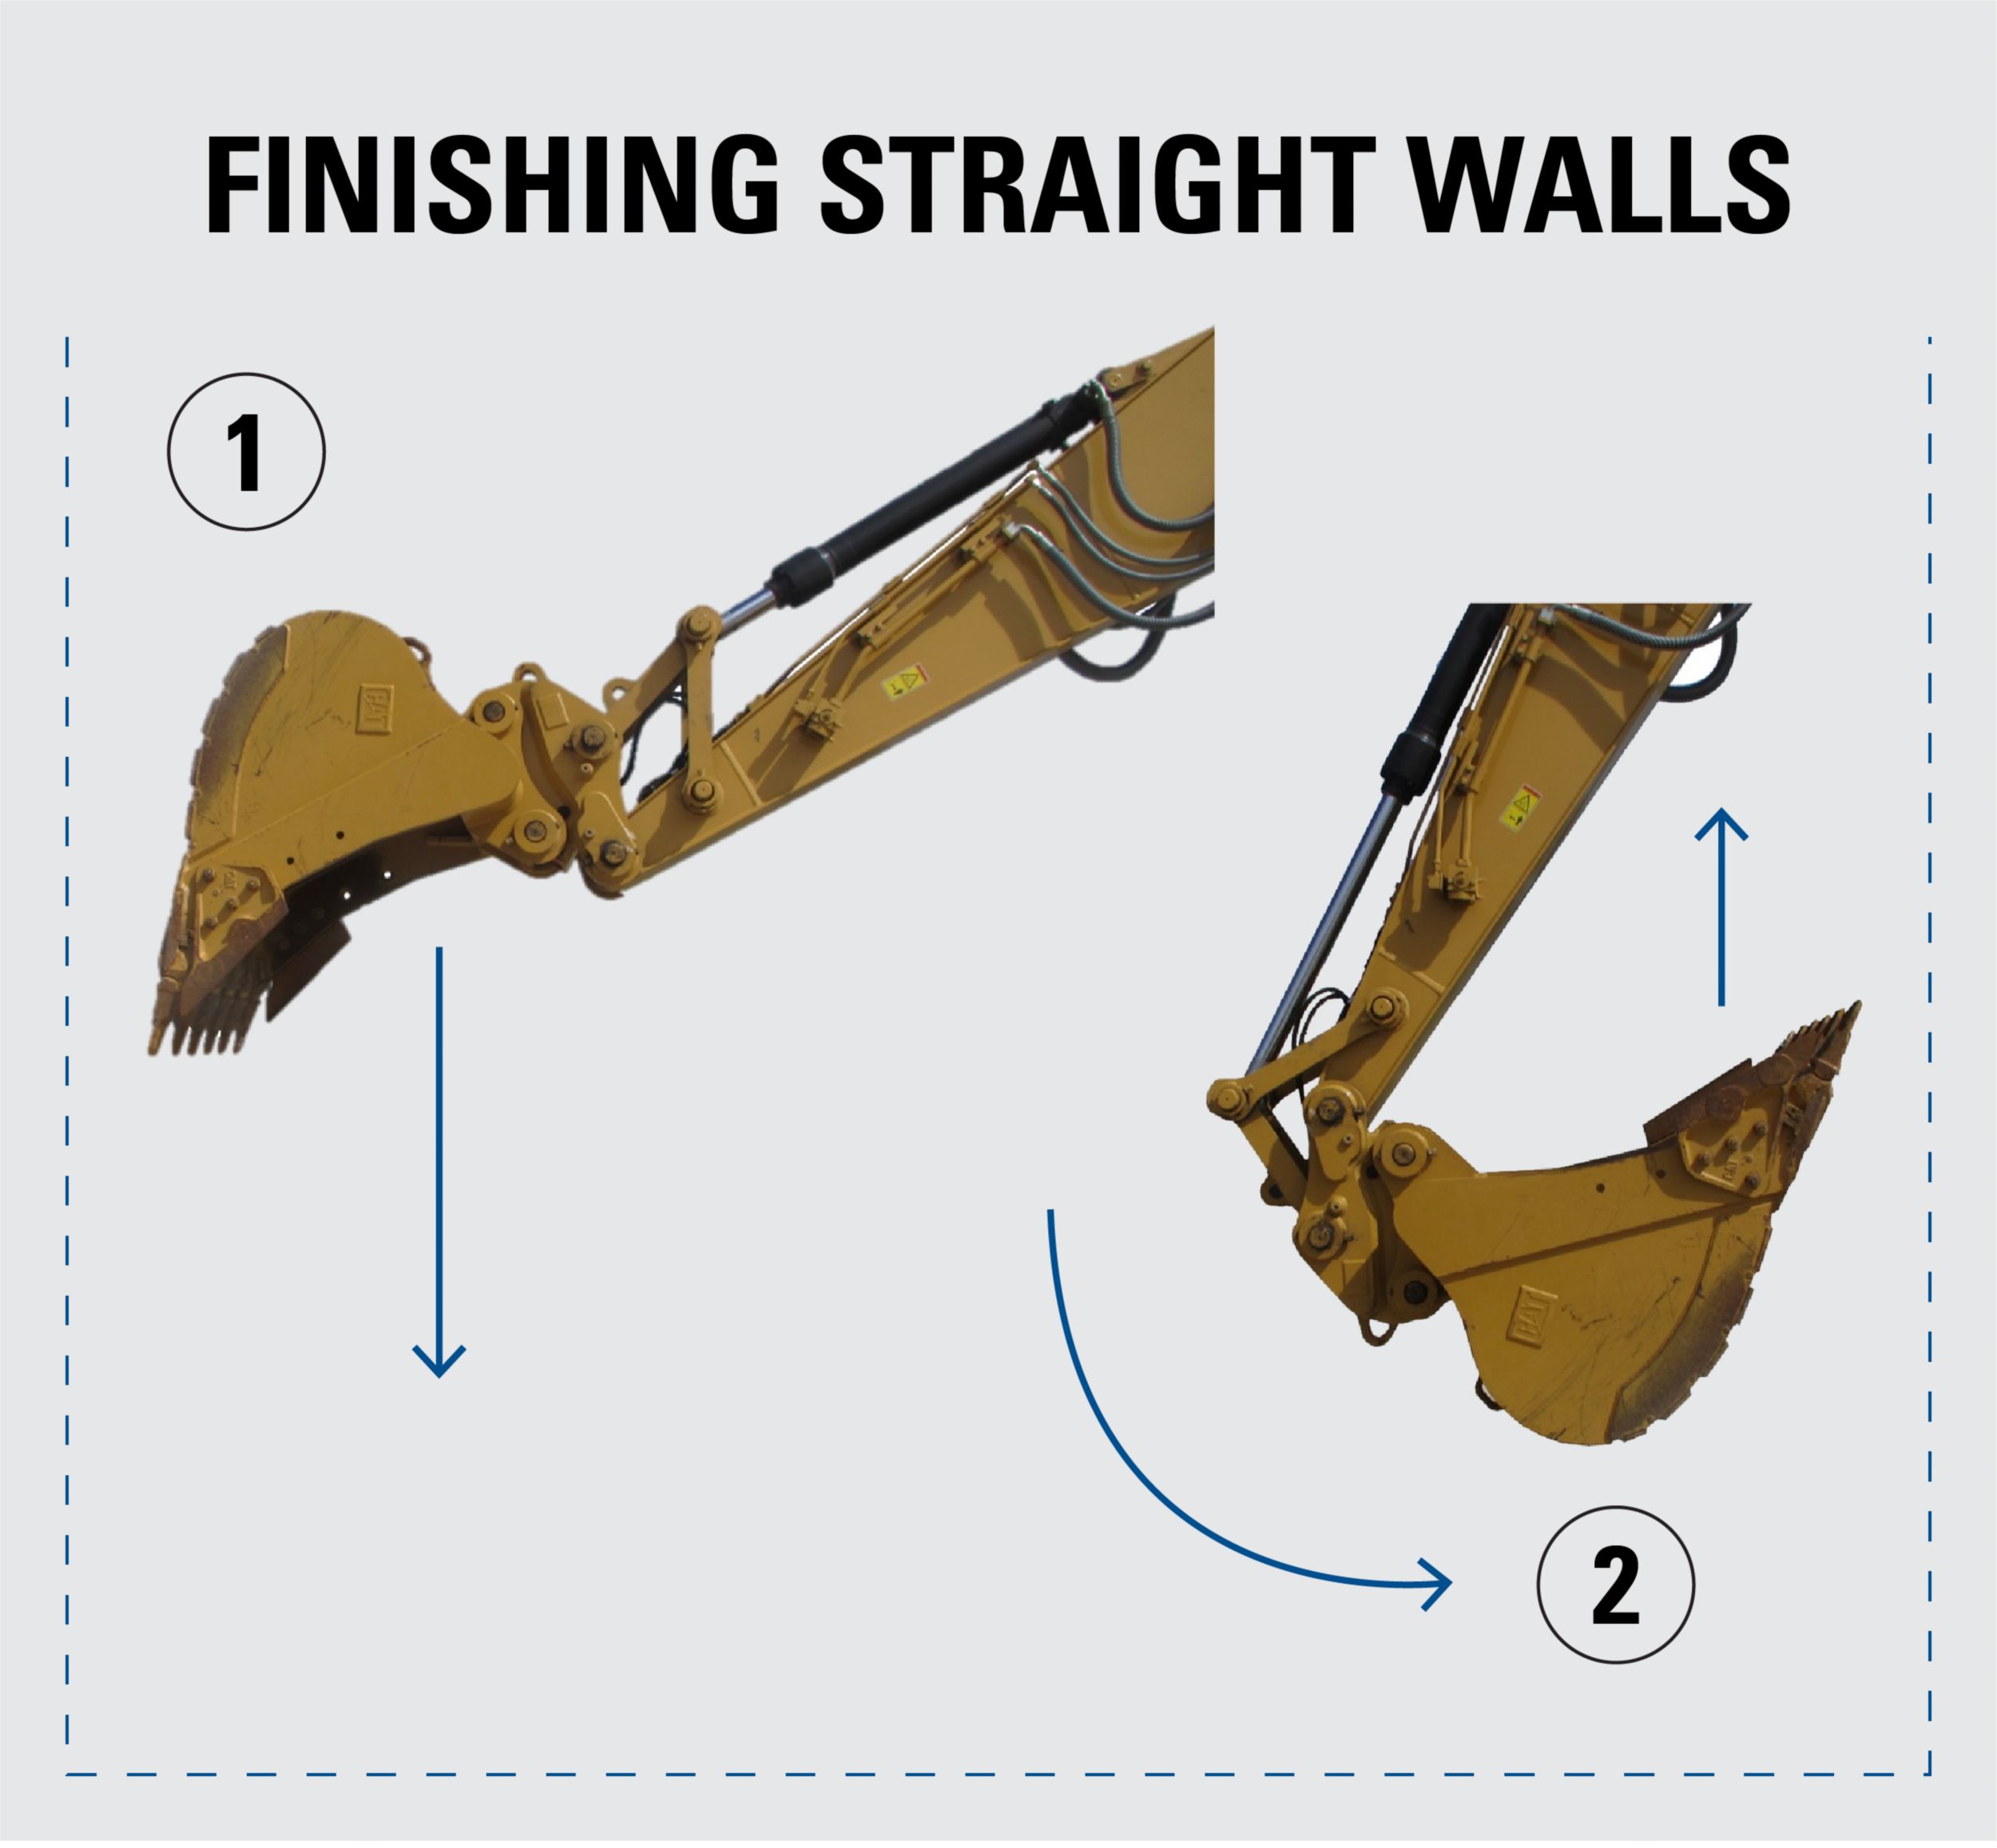 To finish the straight walls of your trench, finish the far wall first.